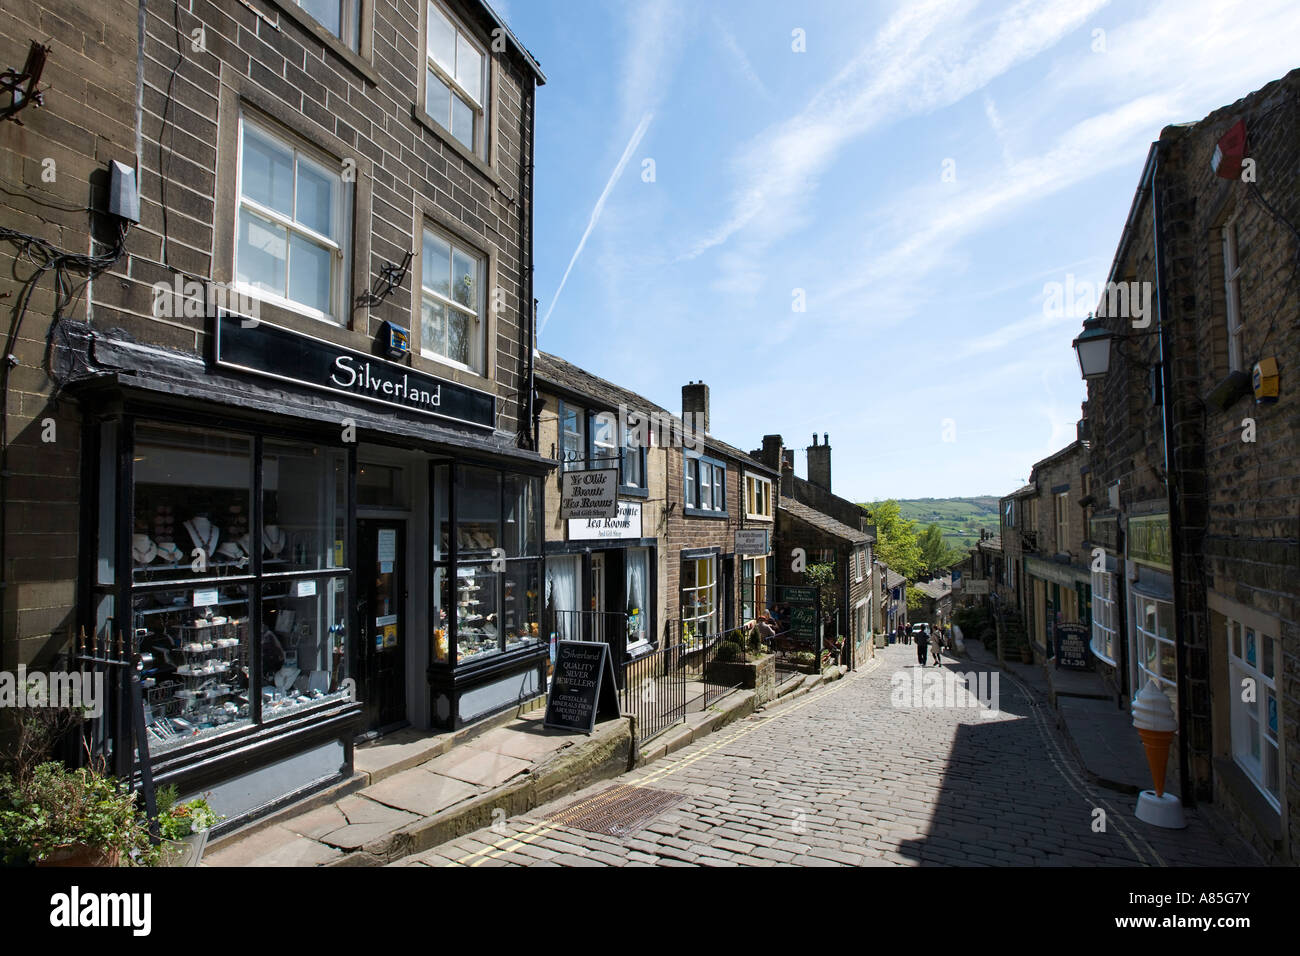 Shops on the main street in the village centre, Haworth, West Yorkshire, England, UK Stock Photo